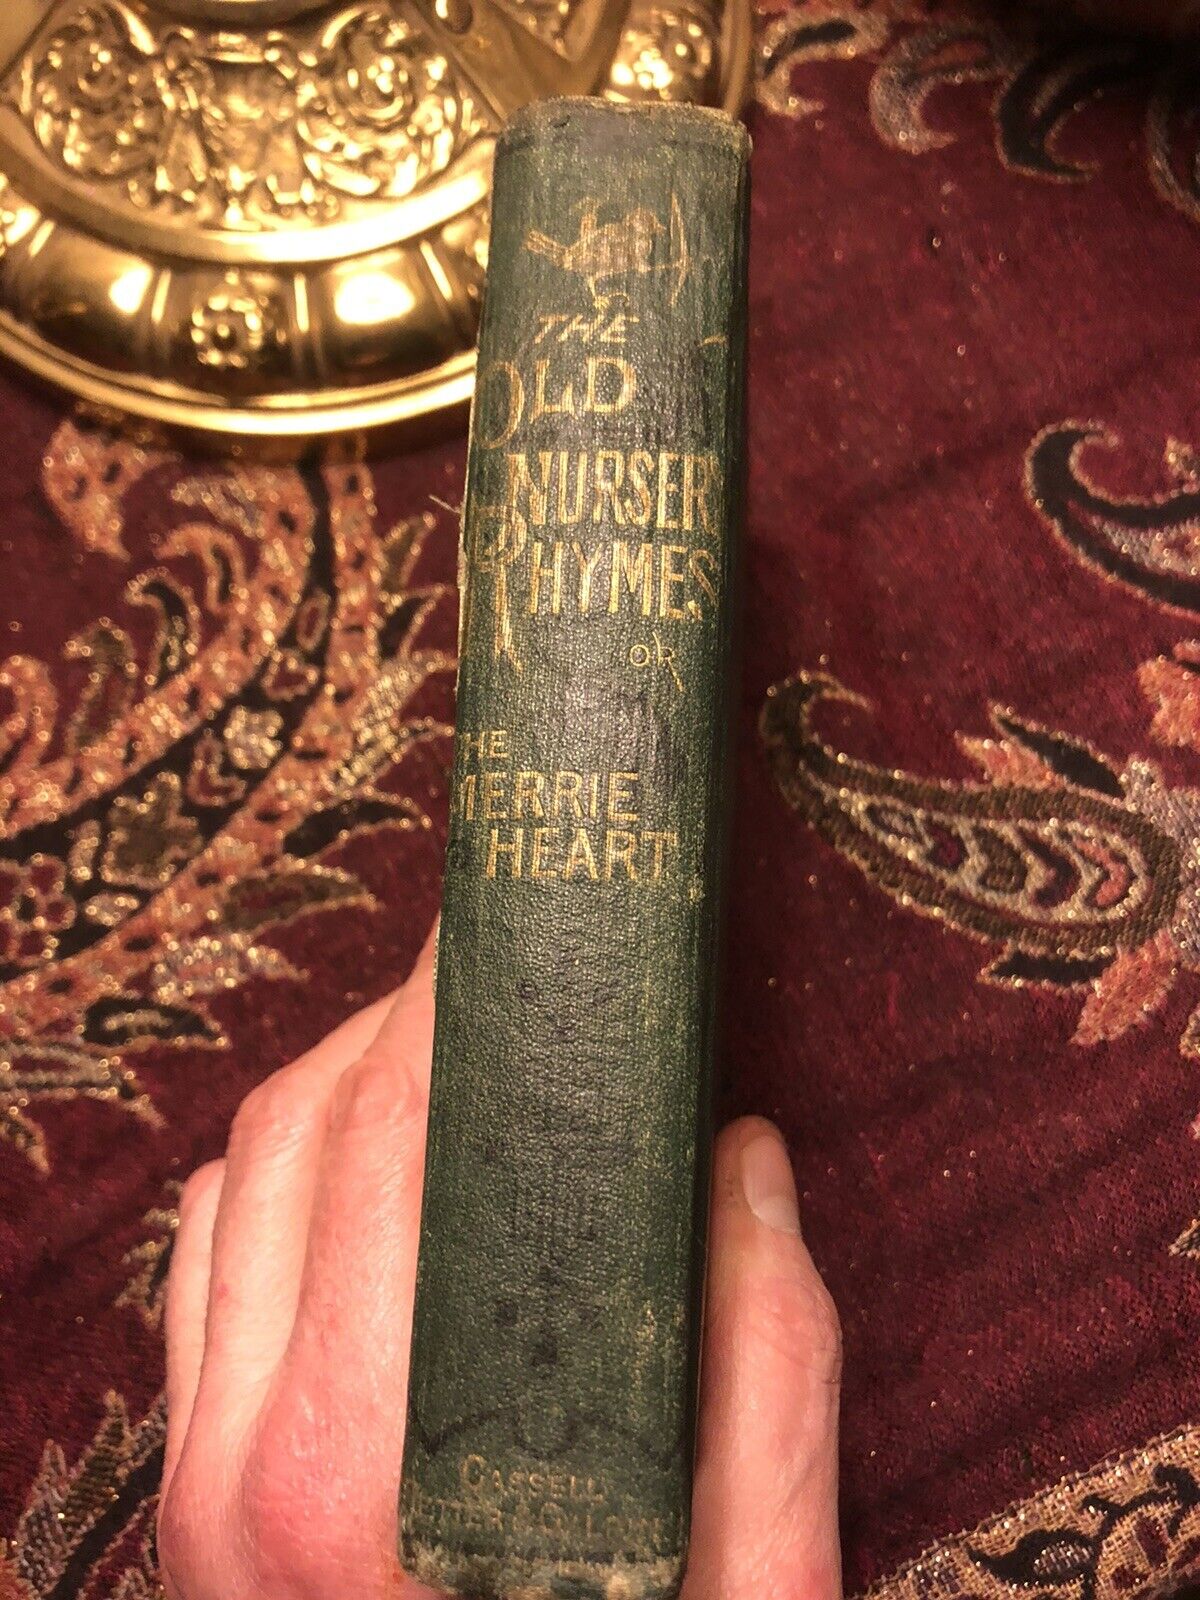 1880 The Old Nursery Rhymes or the Merrie Heart : Walter Crane (6 Colour Plates)